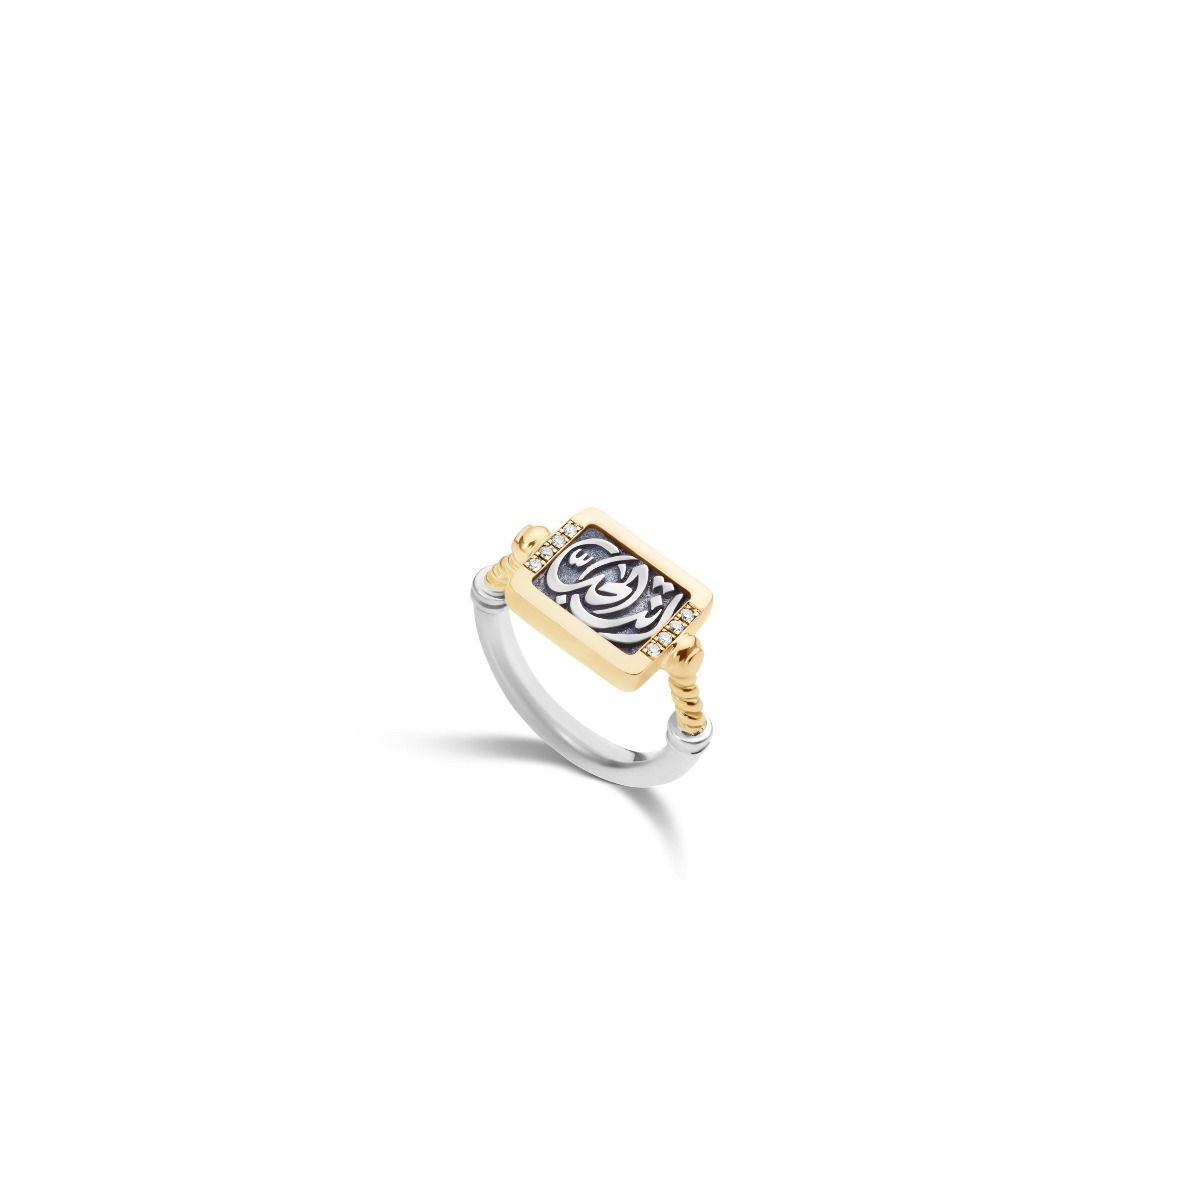 You Are The One Chevalier Ring by Azza Fahmy - Designer Rings